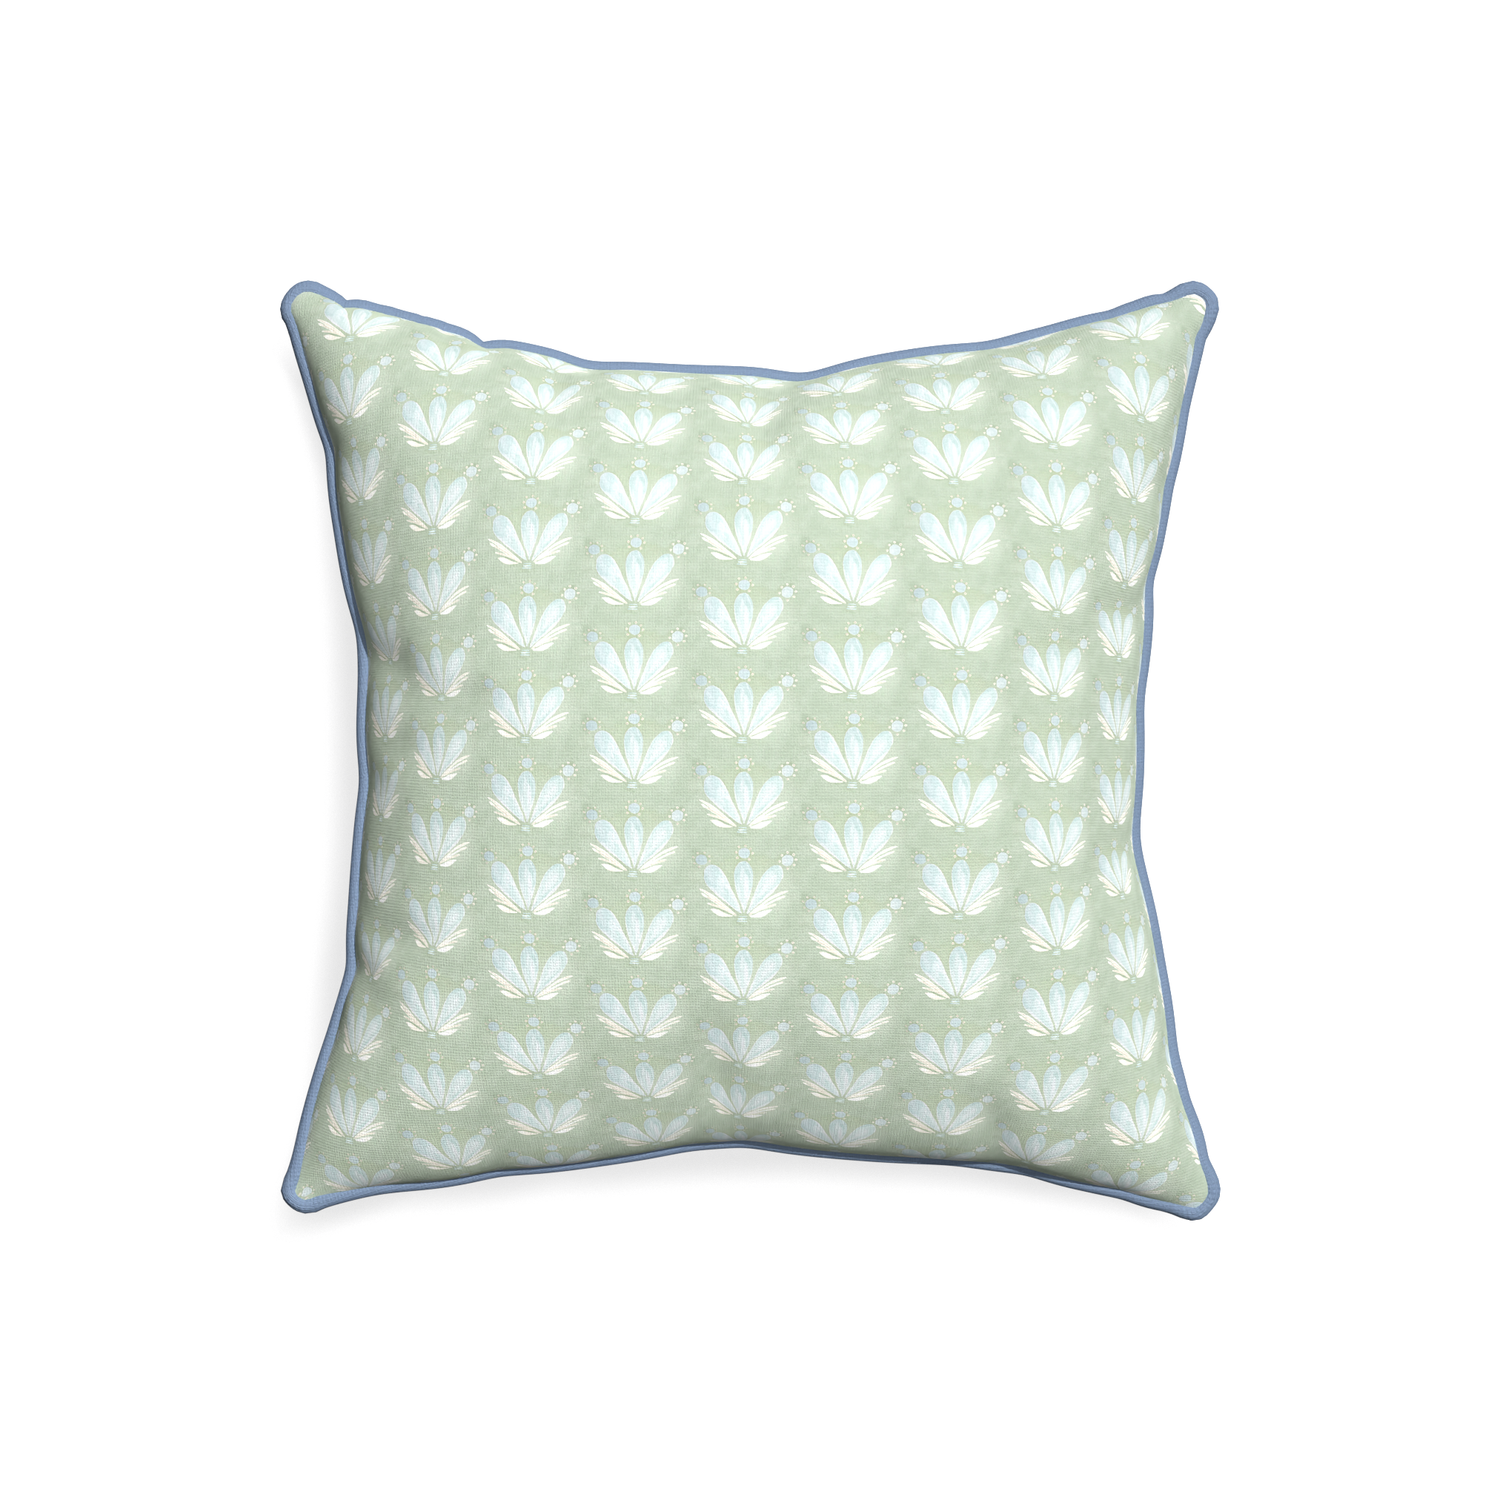 20-square serena sea salt custom blue & green floral drop repeatpillow with sky piping on white background